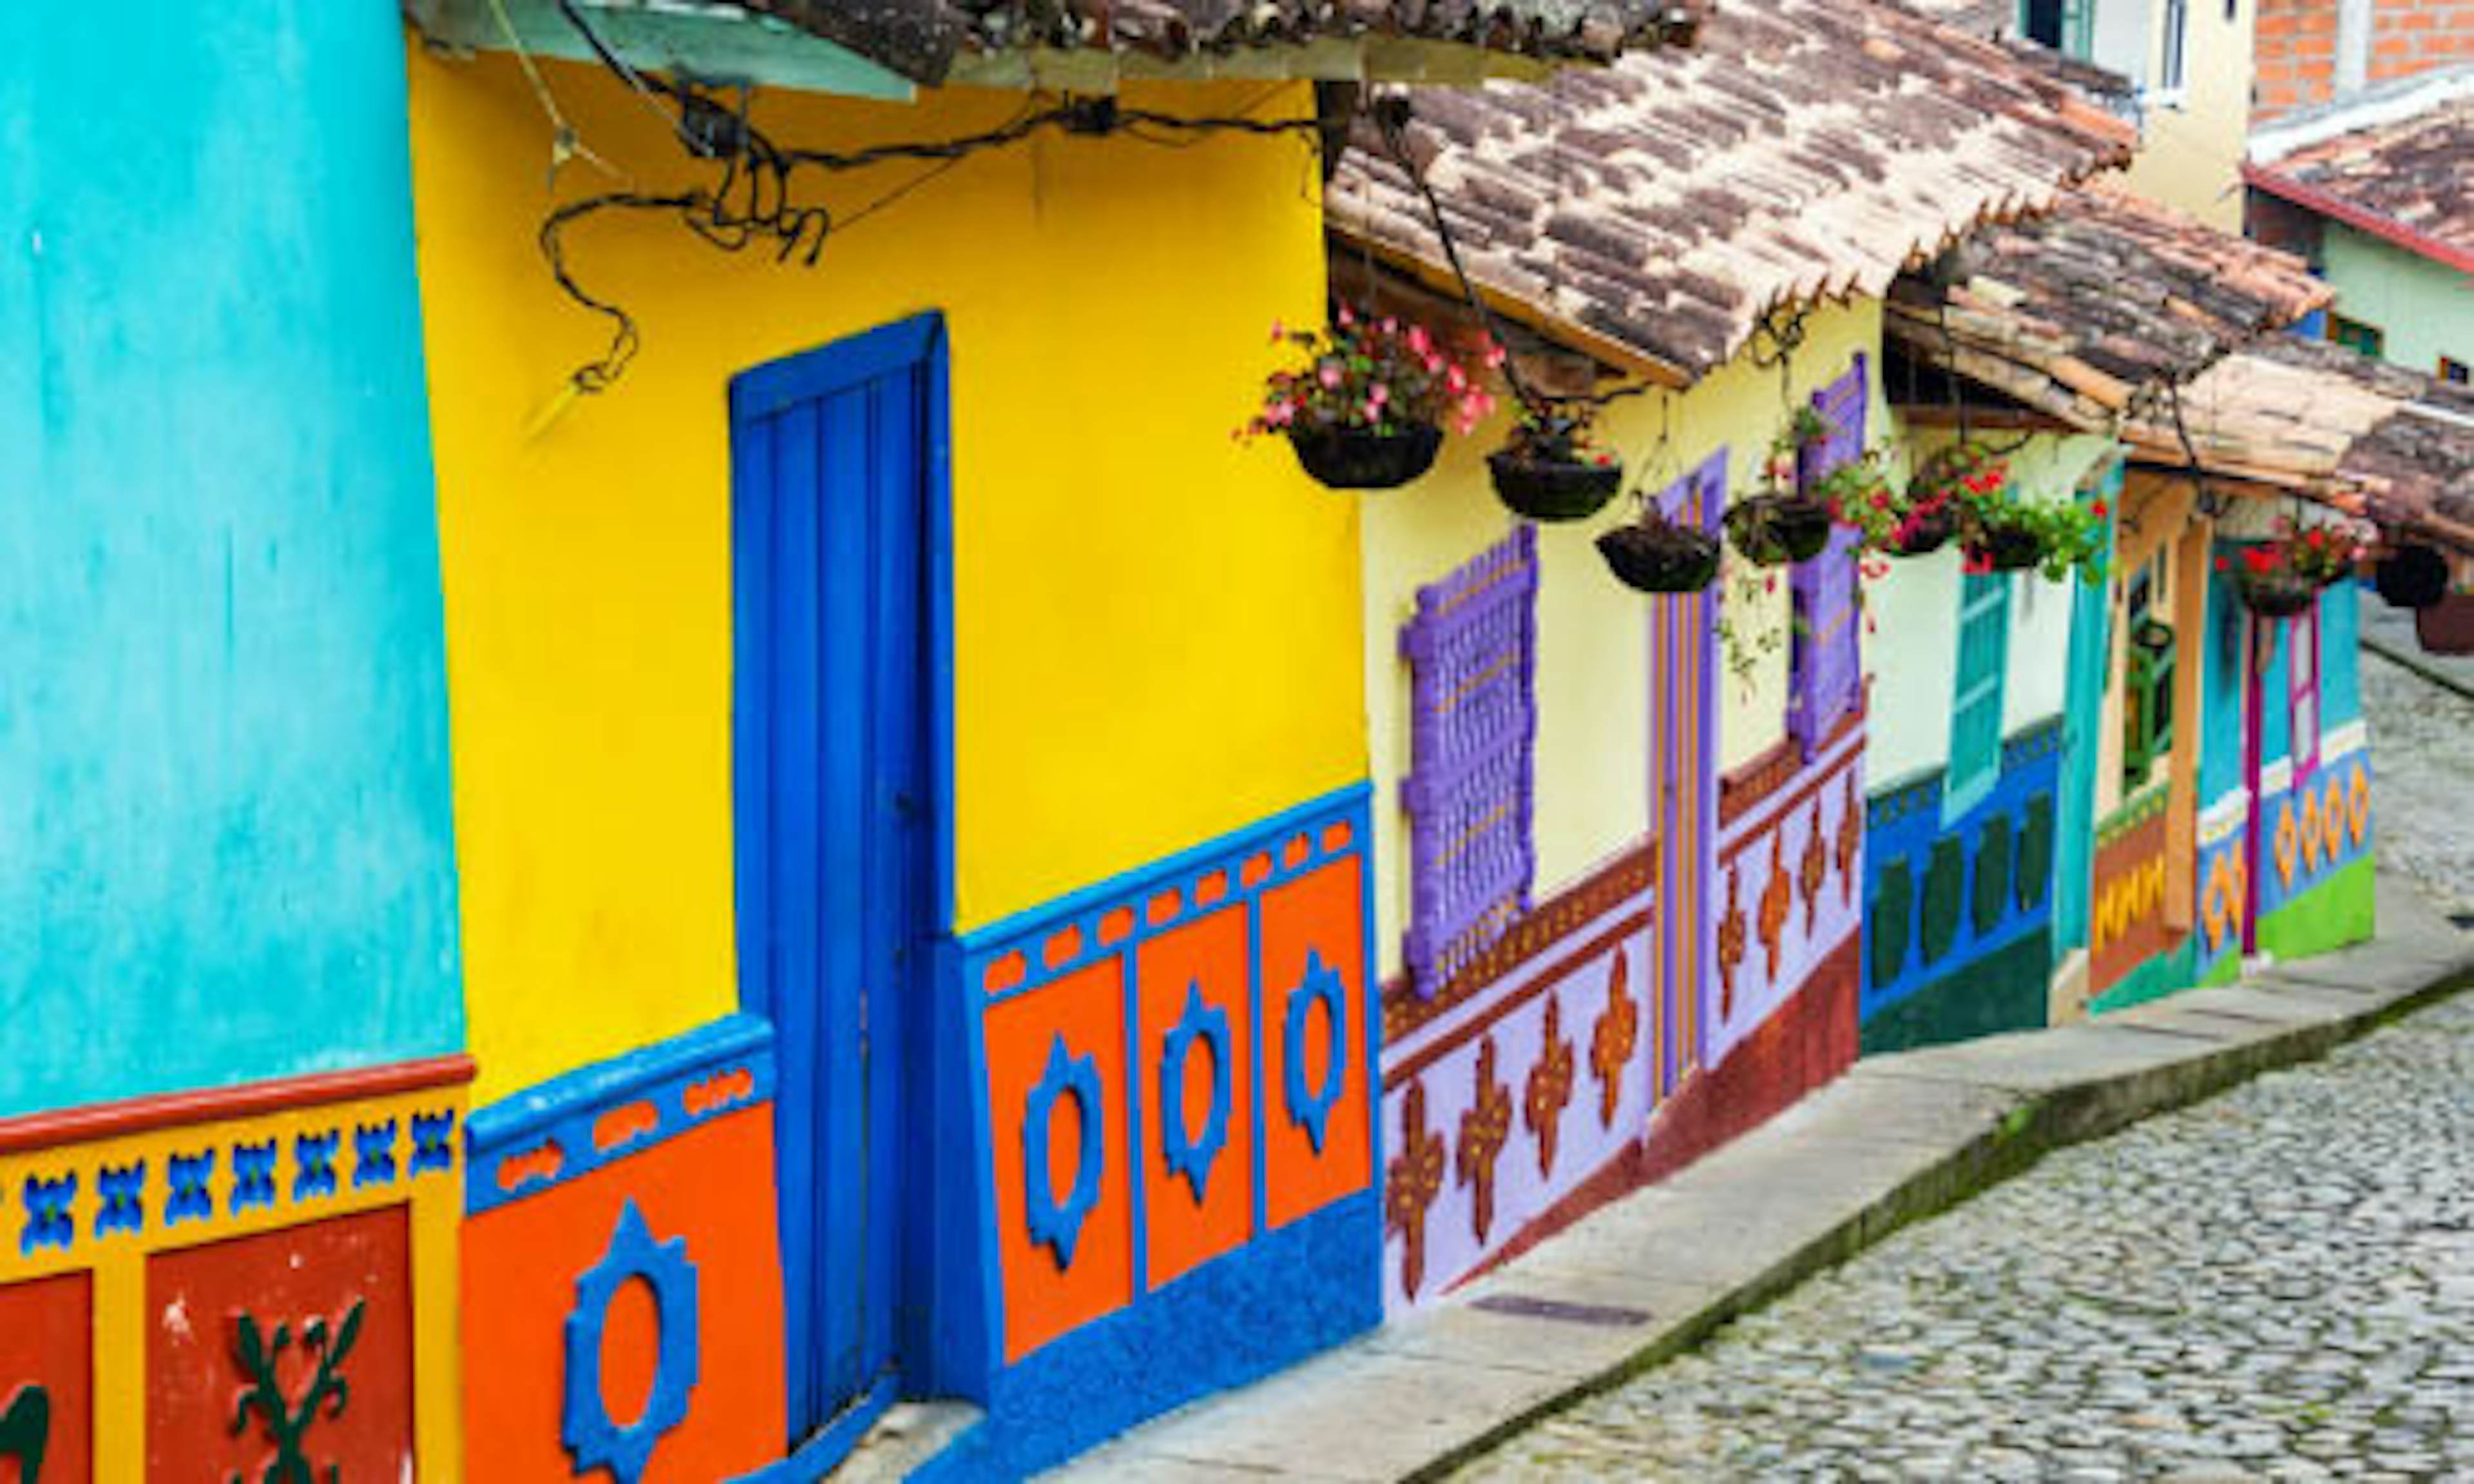 A street view depicting the colours of traditional homes in Bogata, Colombia, in vivid bright yellows, reds, greens and blues. The short buildings have red tiles and hanging plant pots